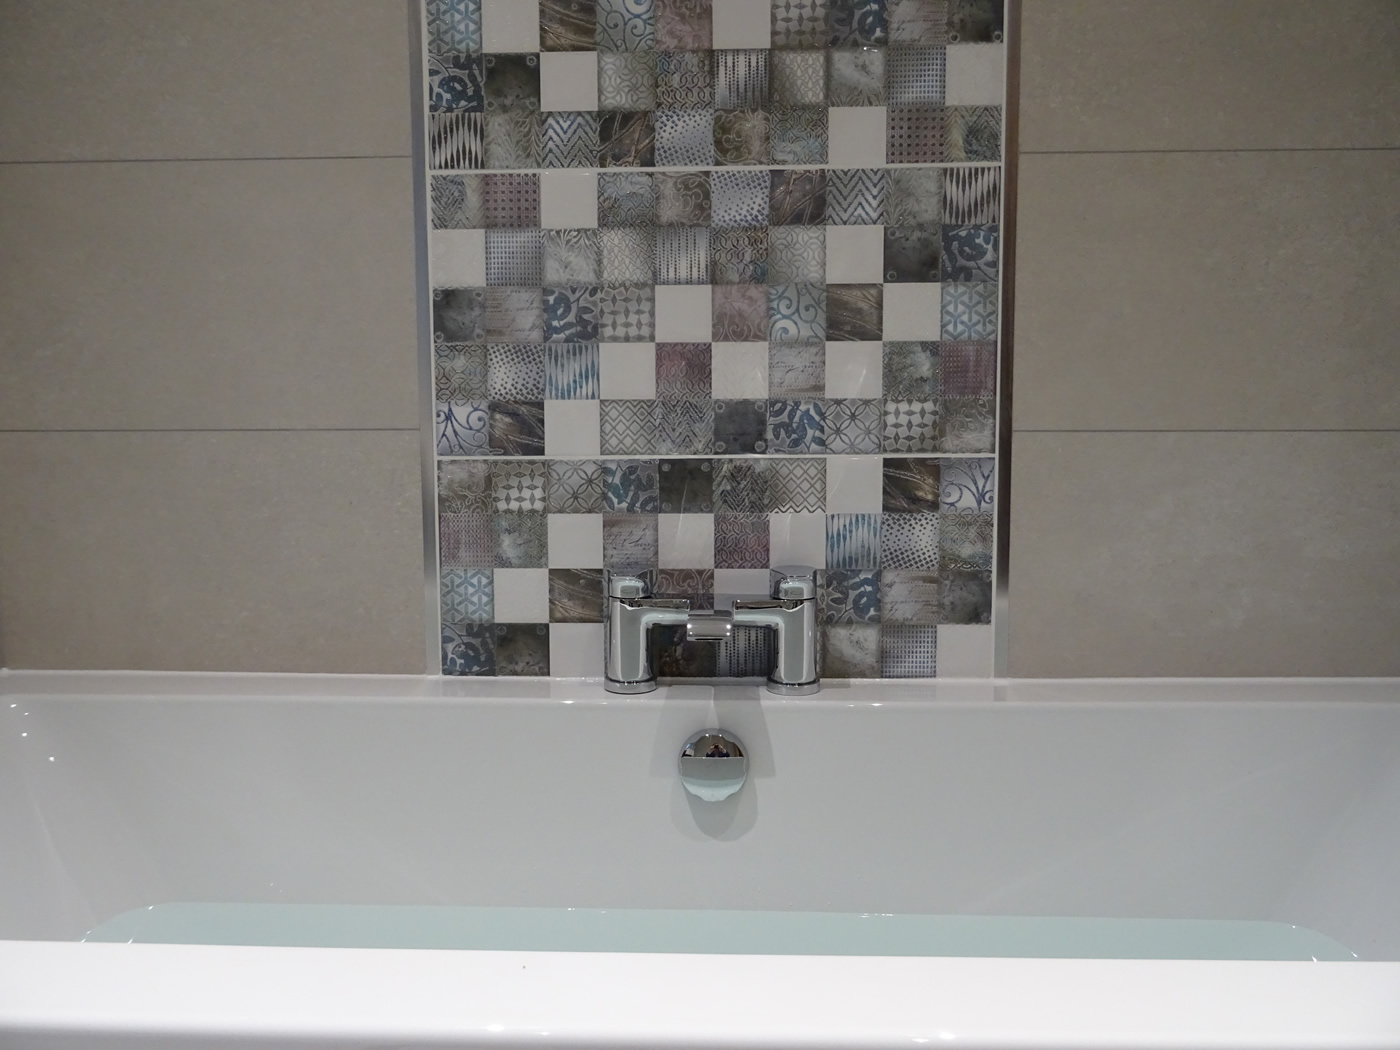 Feature tiled wall above taps on bath wall